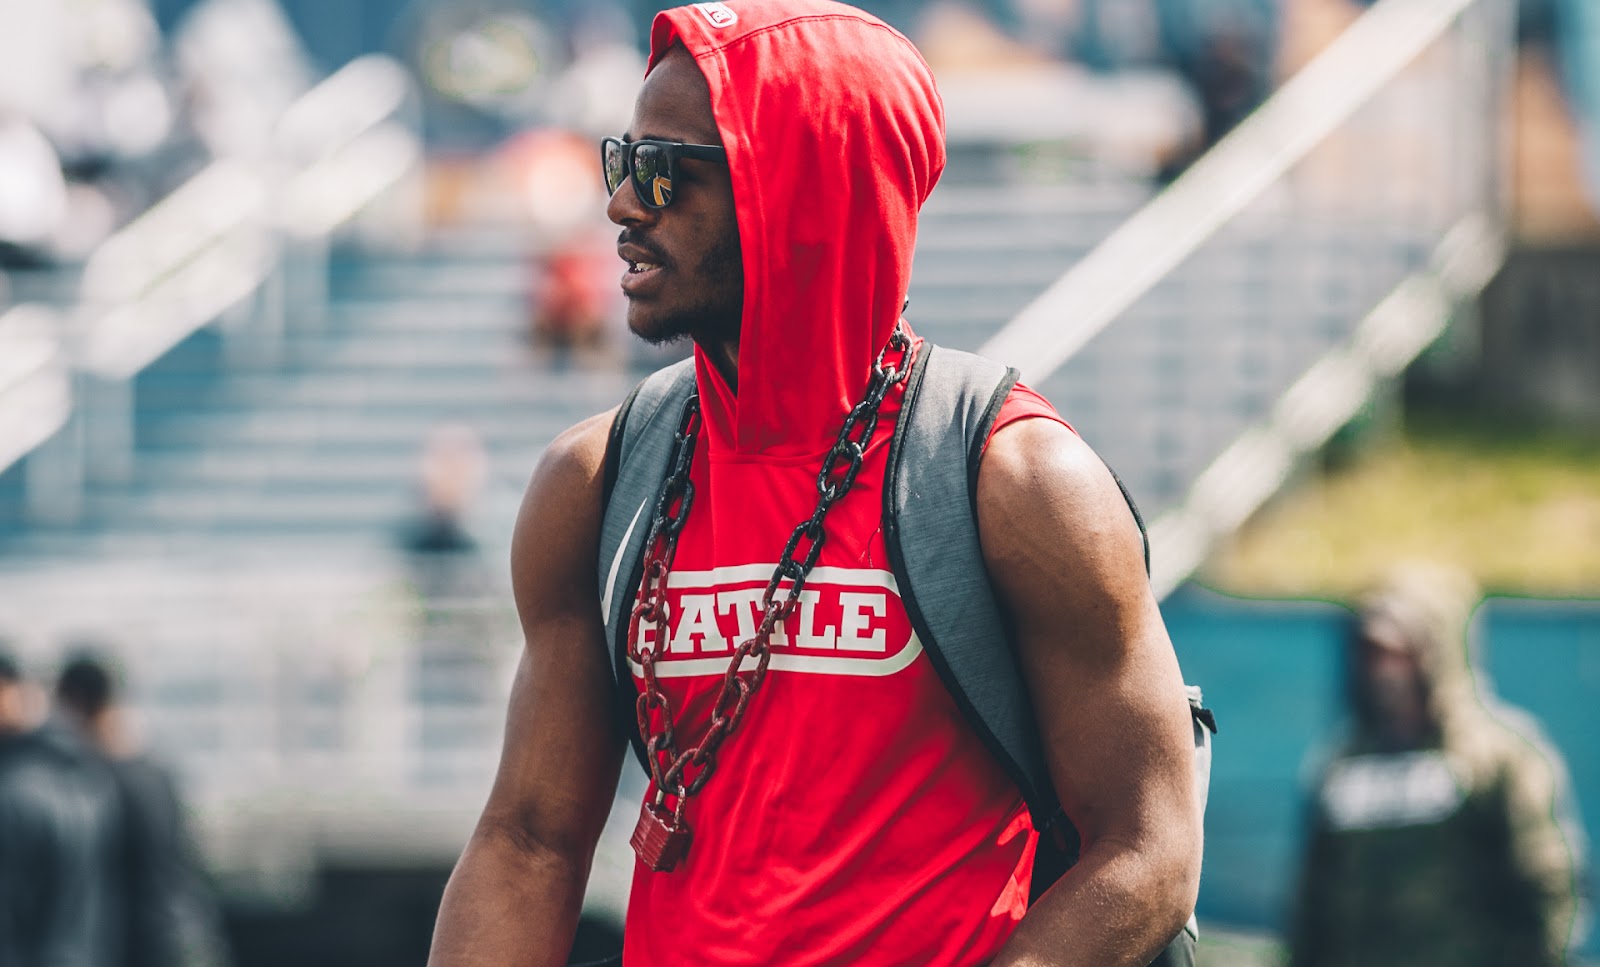 Football player wearing the Battle Sleeveless Light Action Hoodie to showcase muscular arms during football training